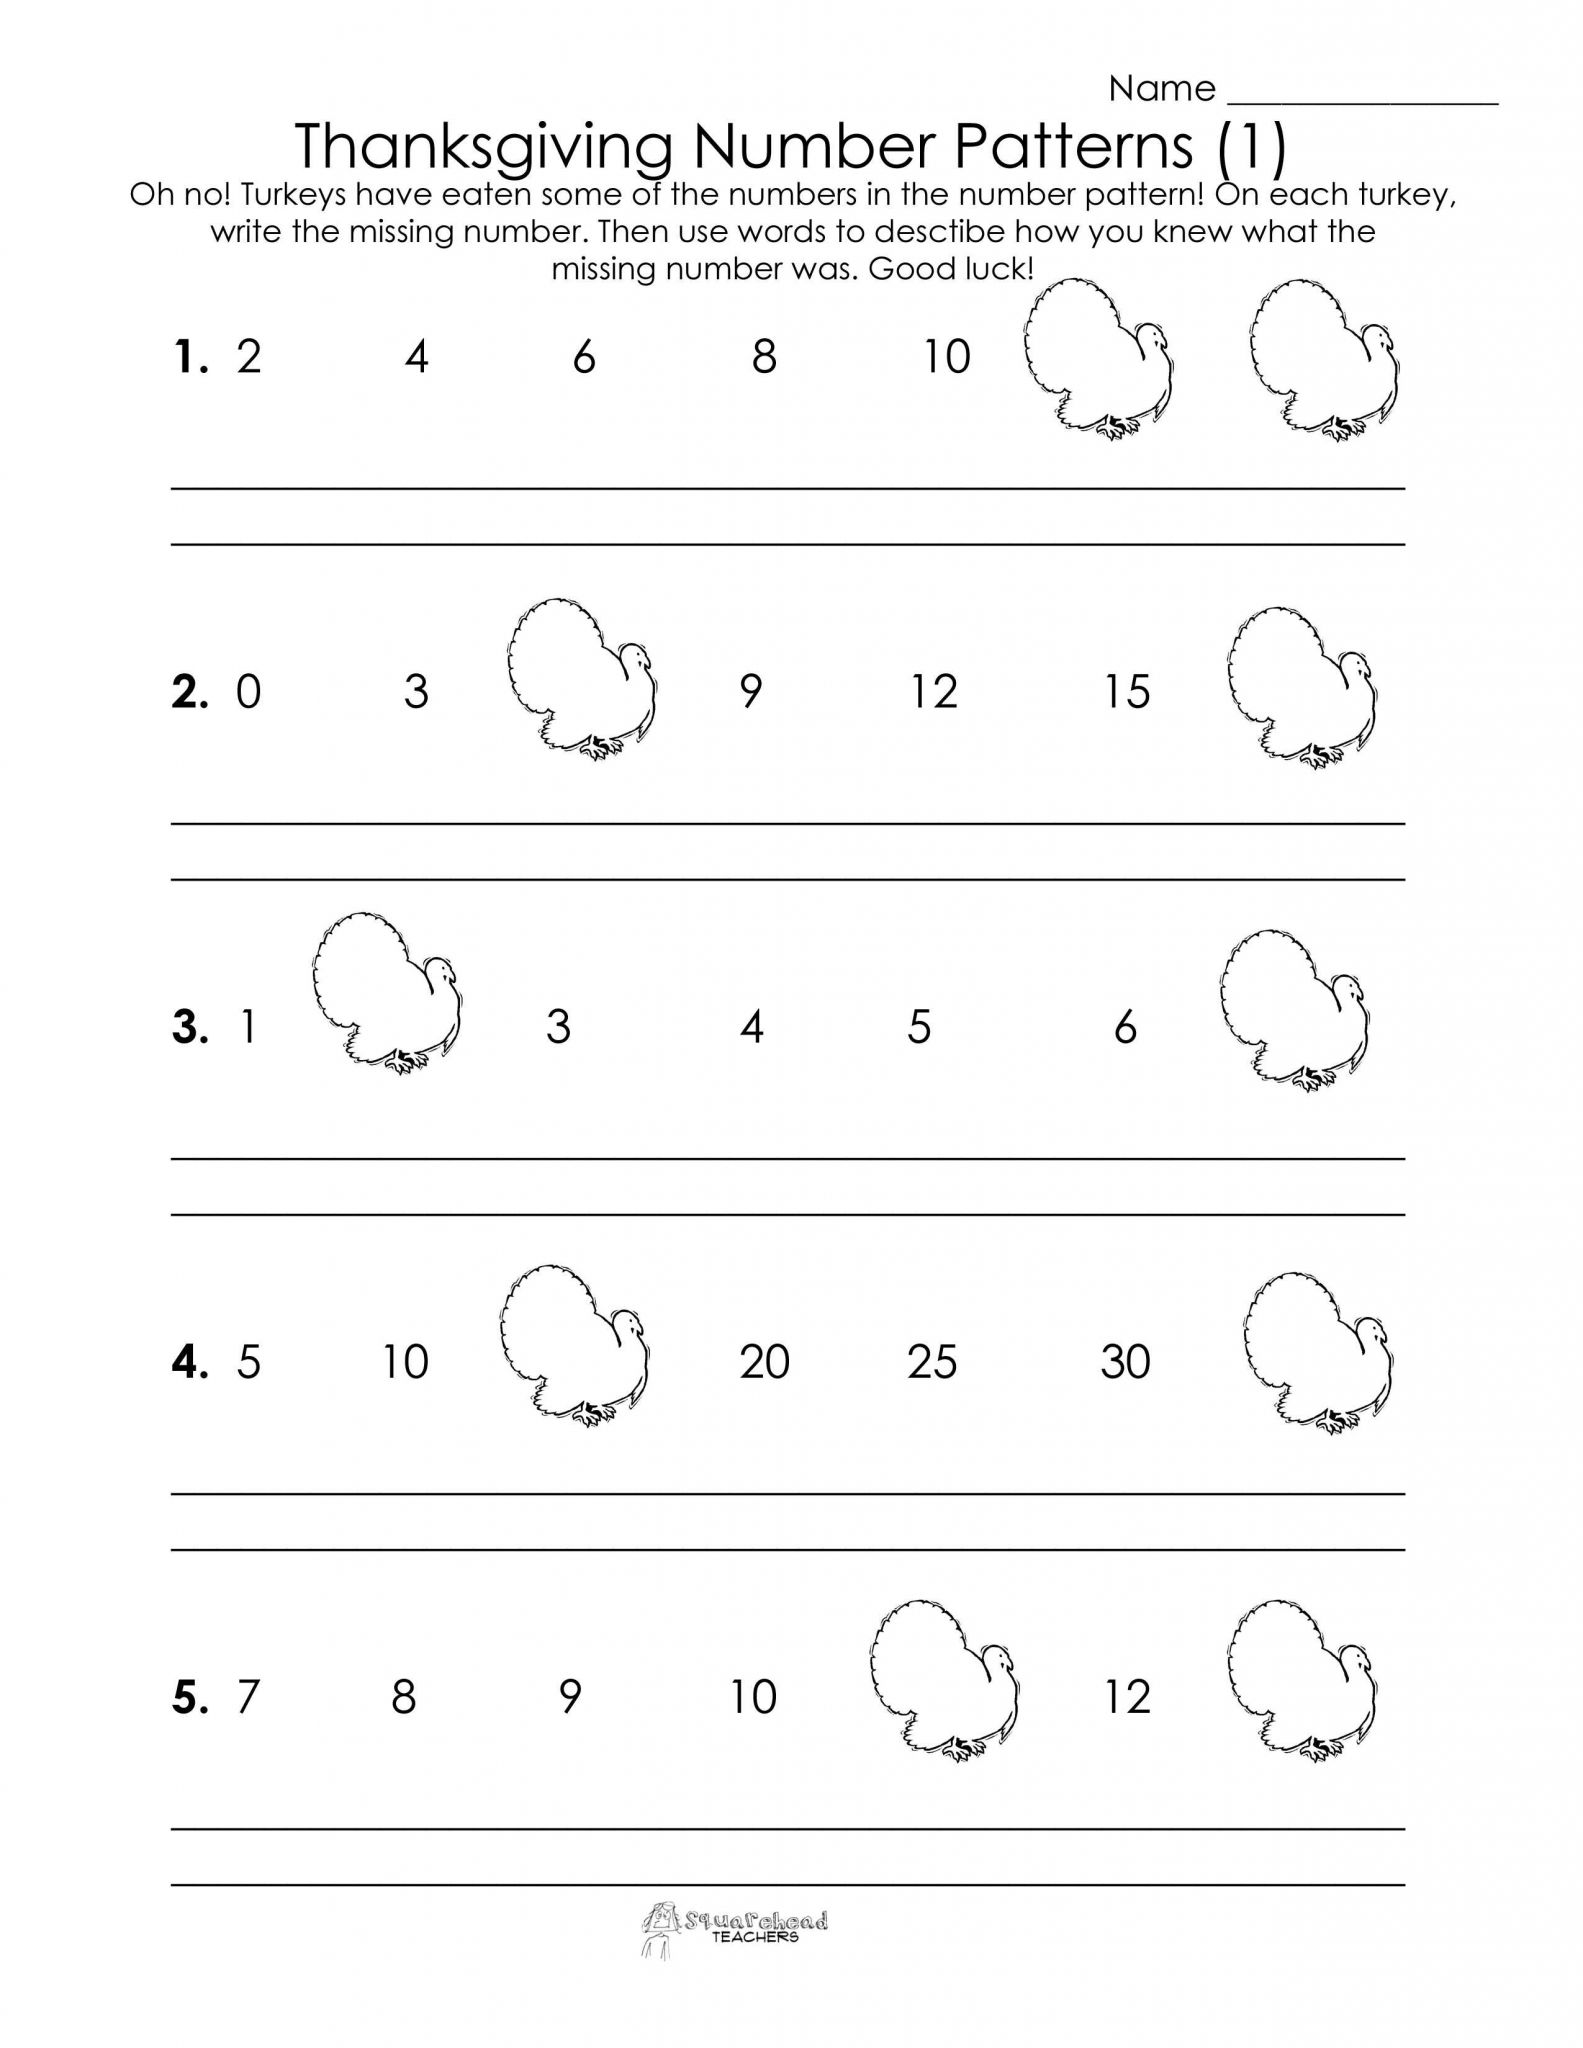 Arithmetic Sequences and Series Worksheet together with Kindergarten Sequence Worksheets Image Collections Worksheet for